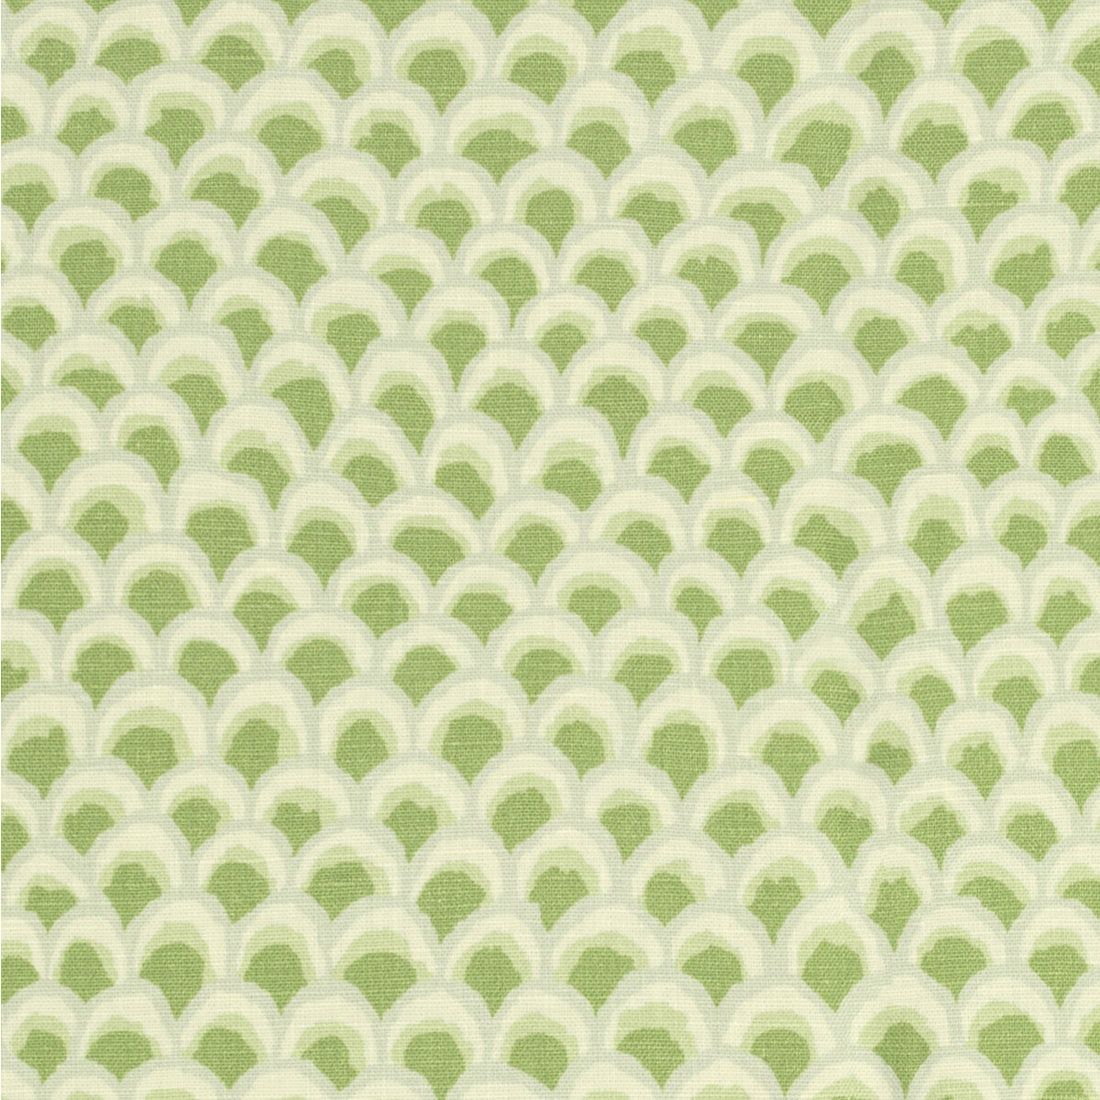 Pave II Print fabric in kiwi color - pattern 8020126.416.0 - by Brunschwig &amp; Fils in the Louverne collection